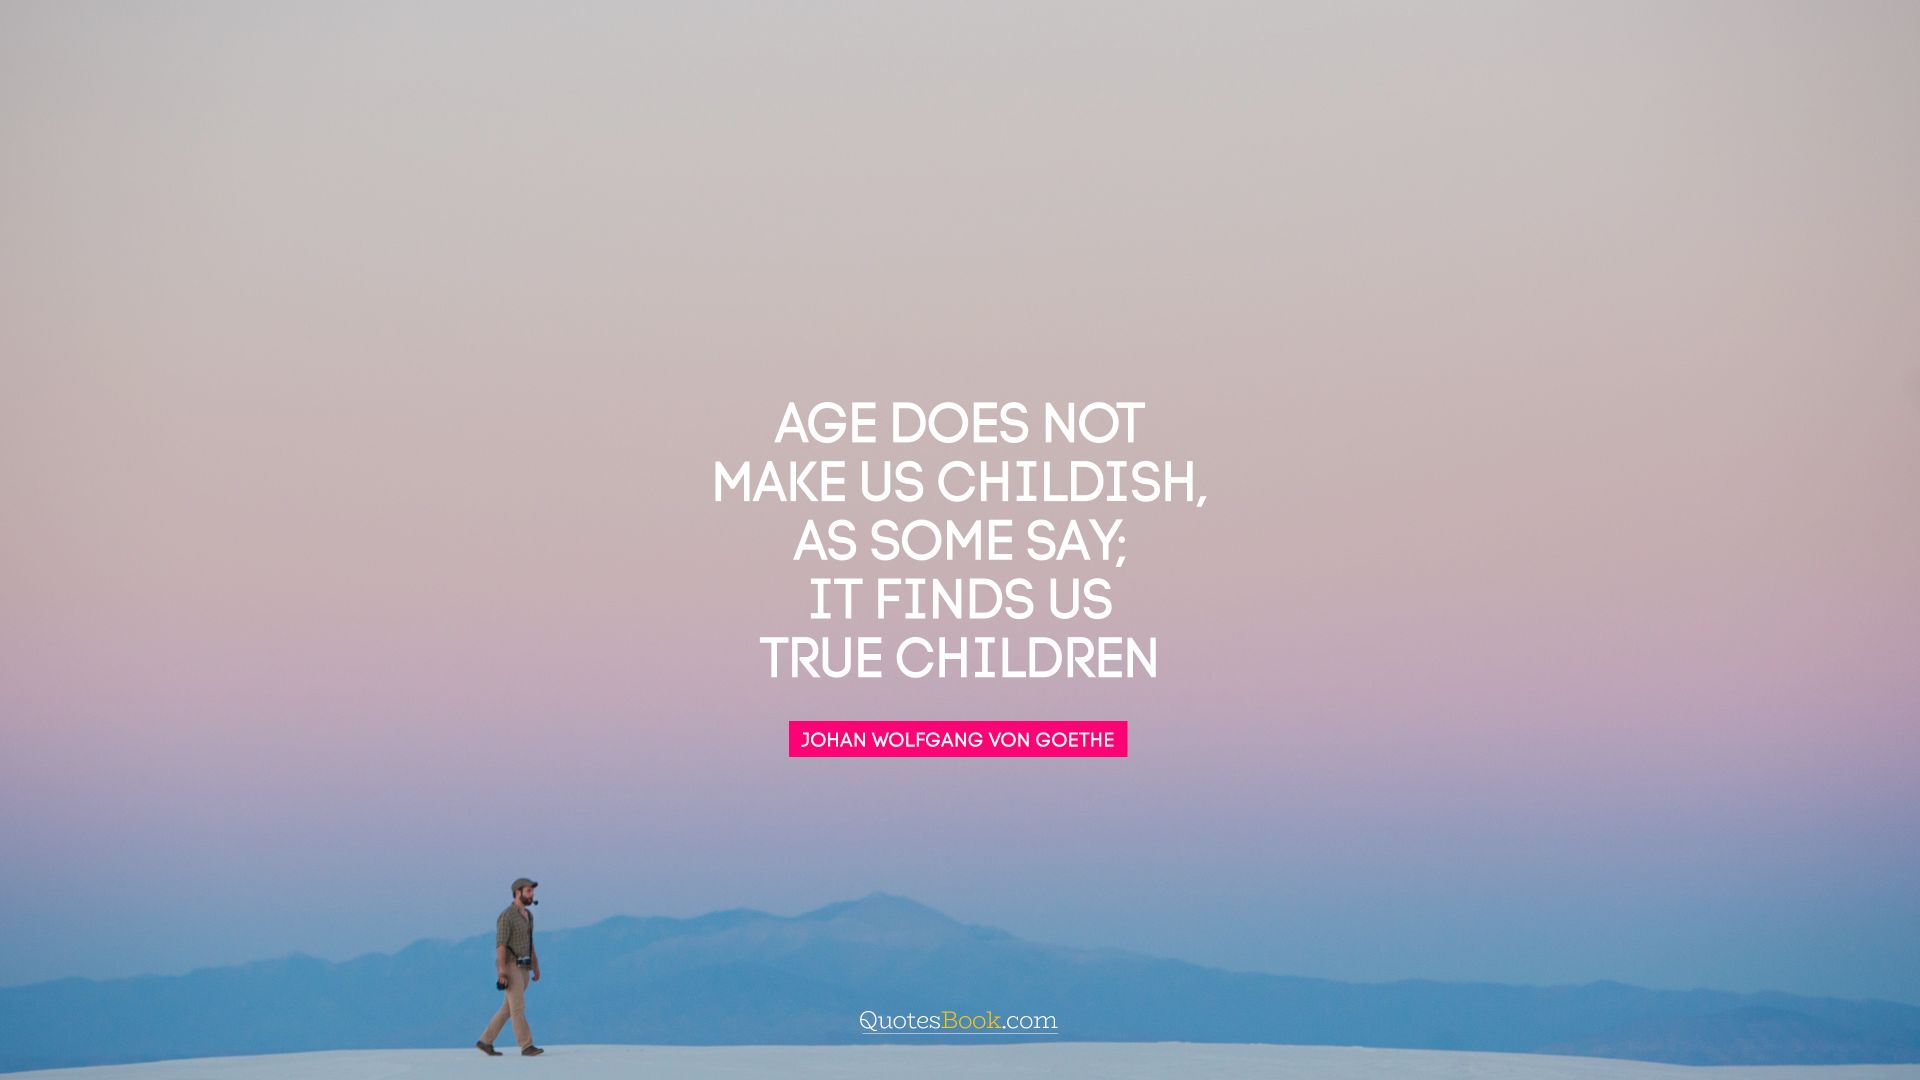 Age does not make us childish, as some say;  it finds us true children. - Quote by Johann Wolfgang von Goethe